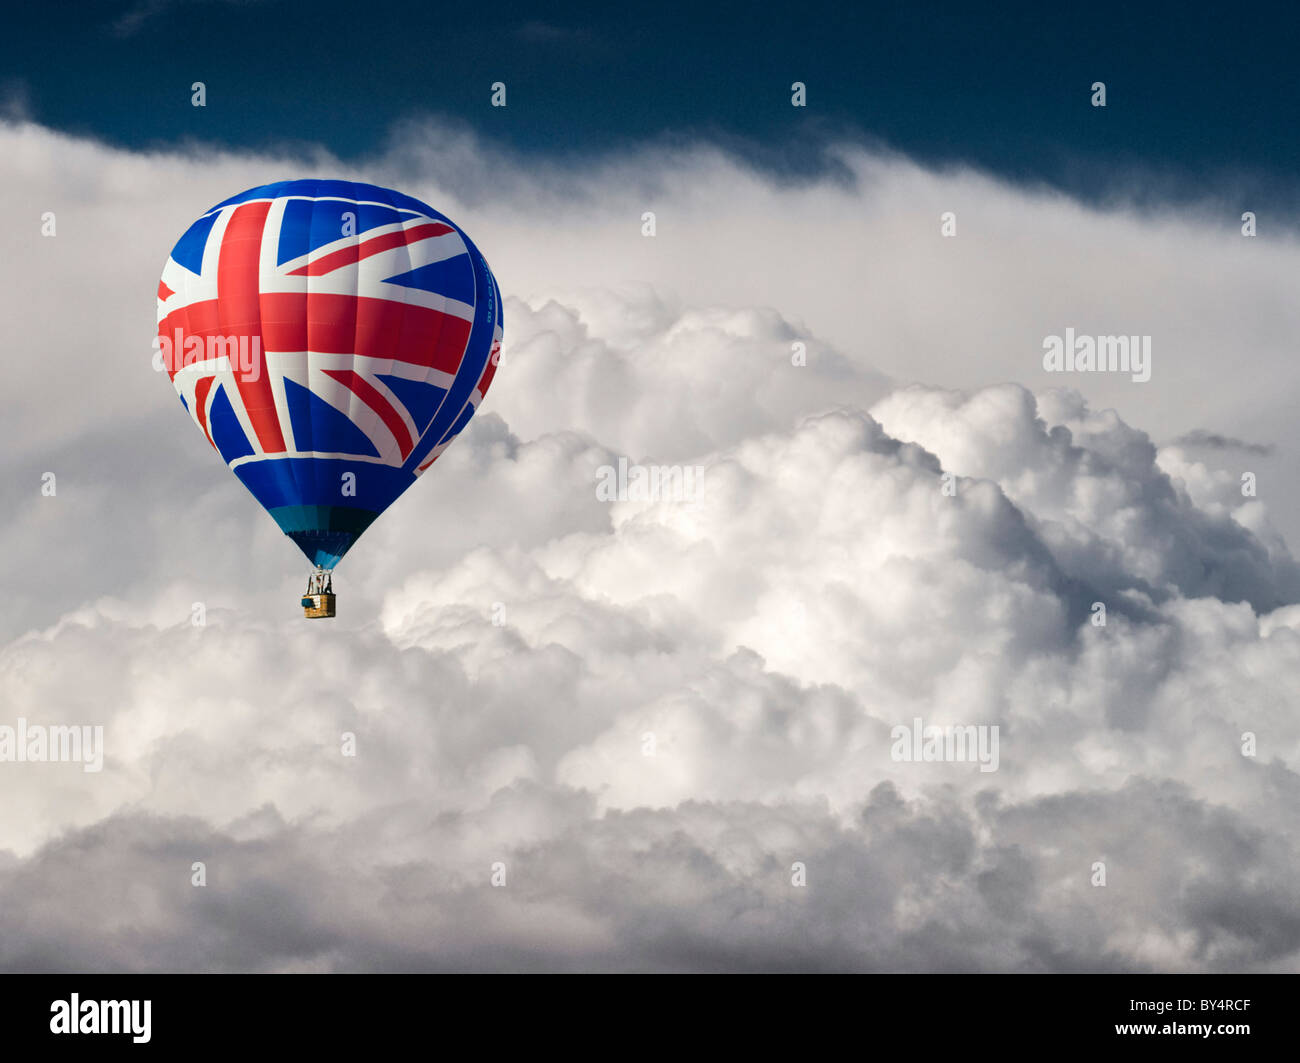 A hot air Balloon with a Union flag motif flying in front of dramatic storm clouds Stock Photo